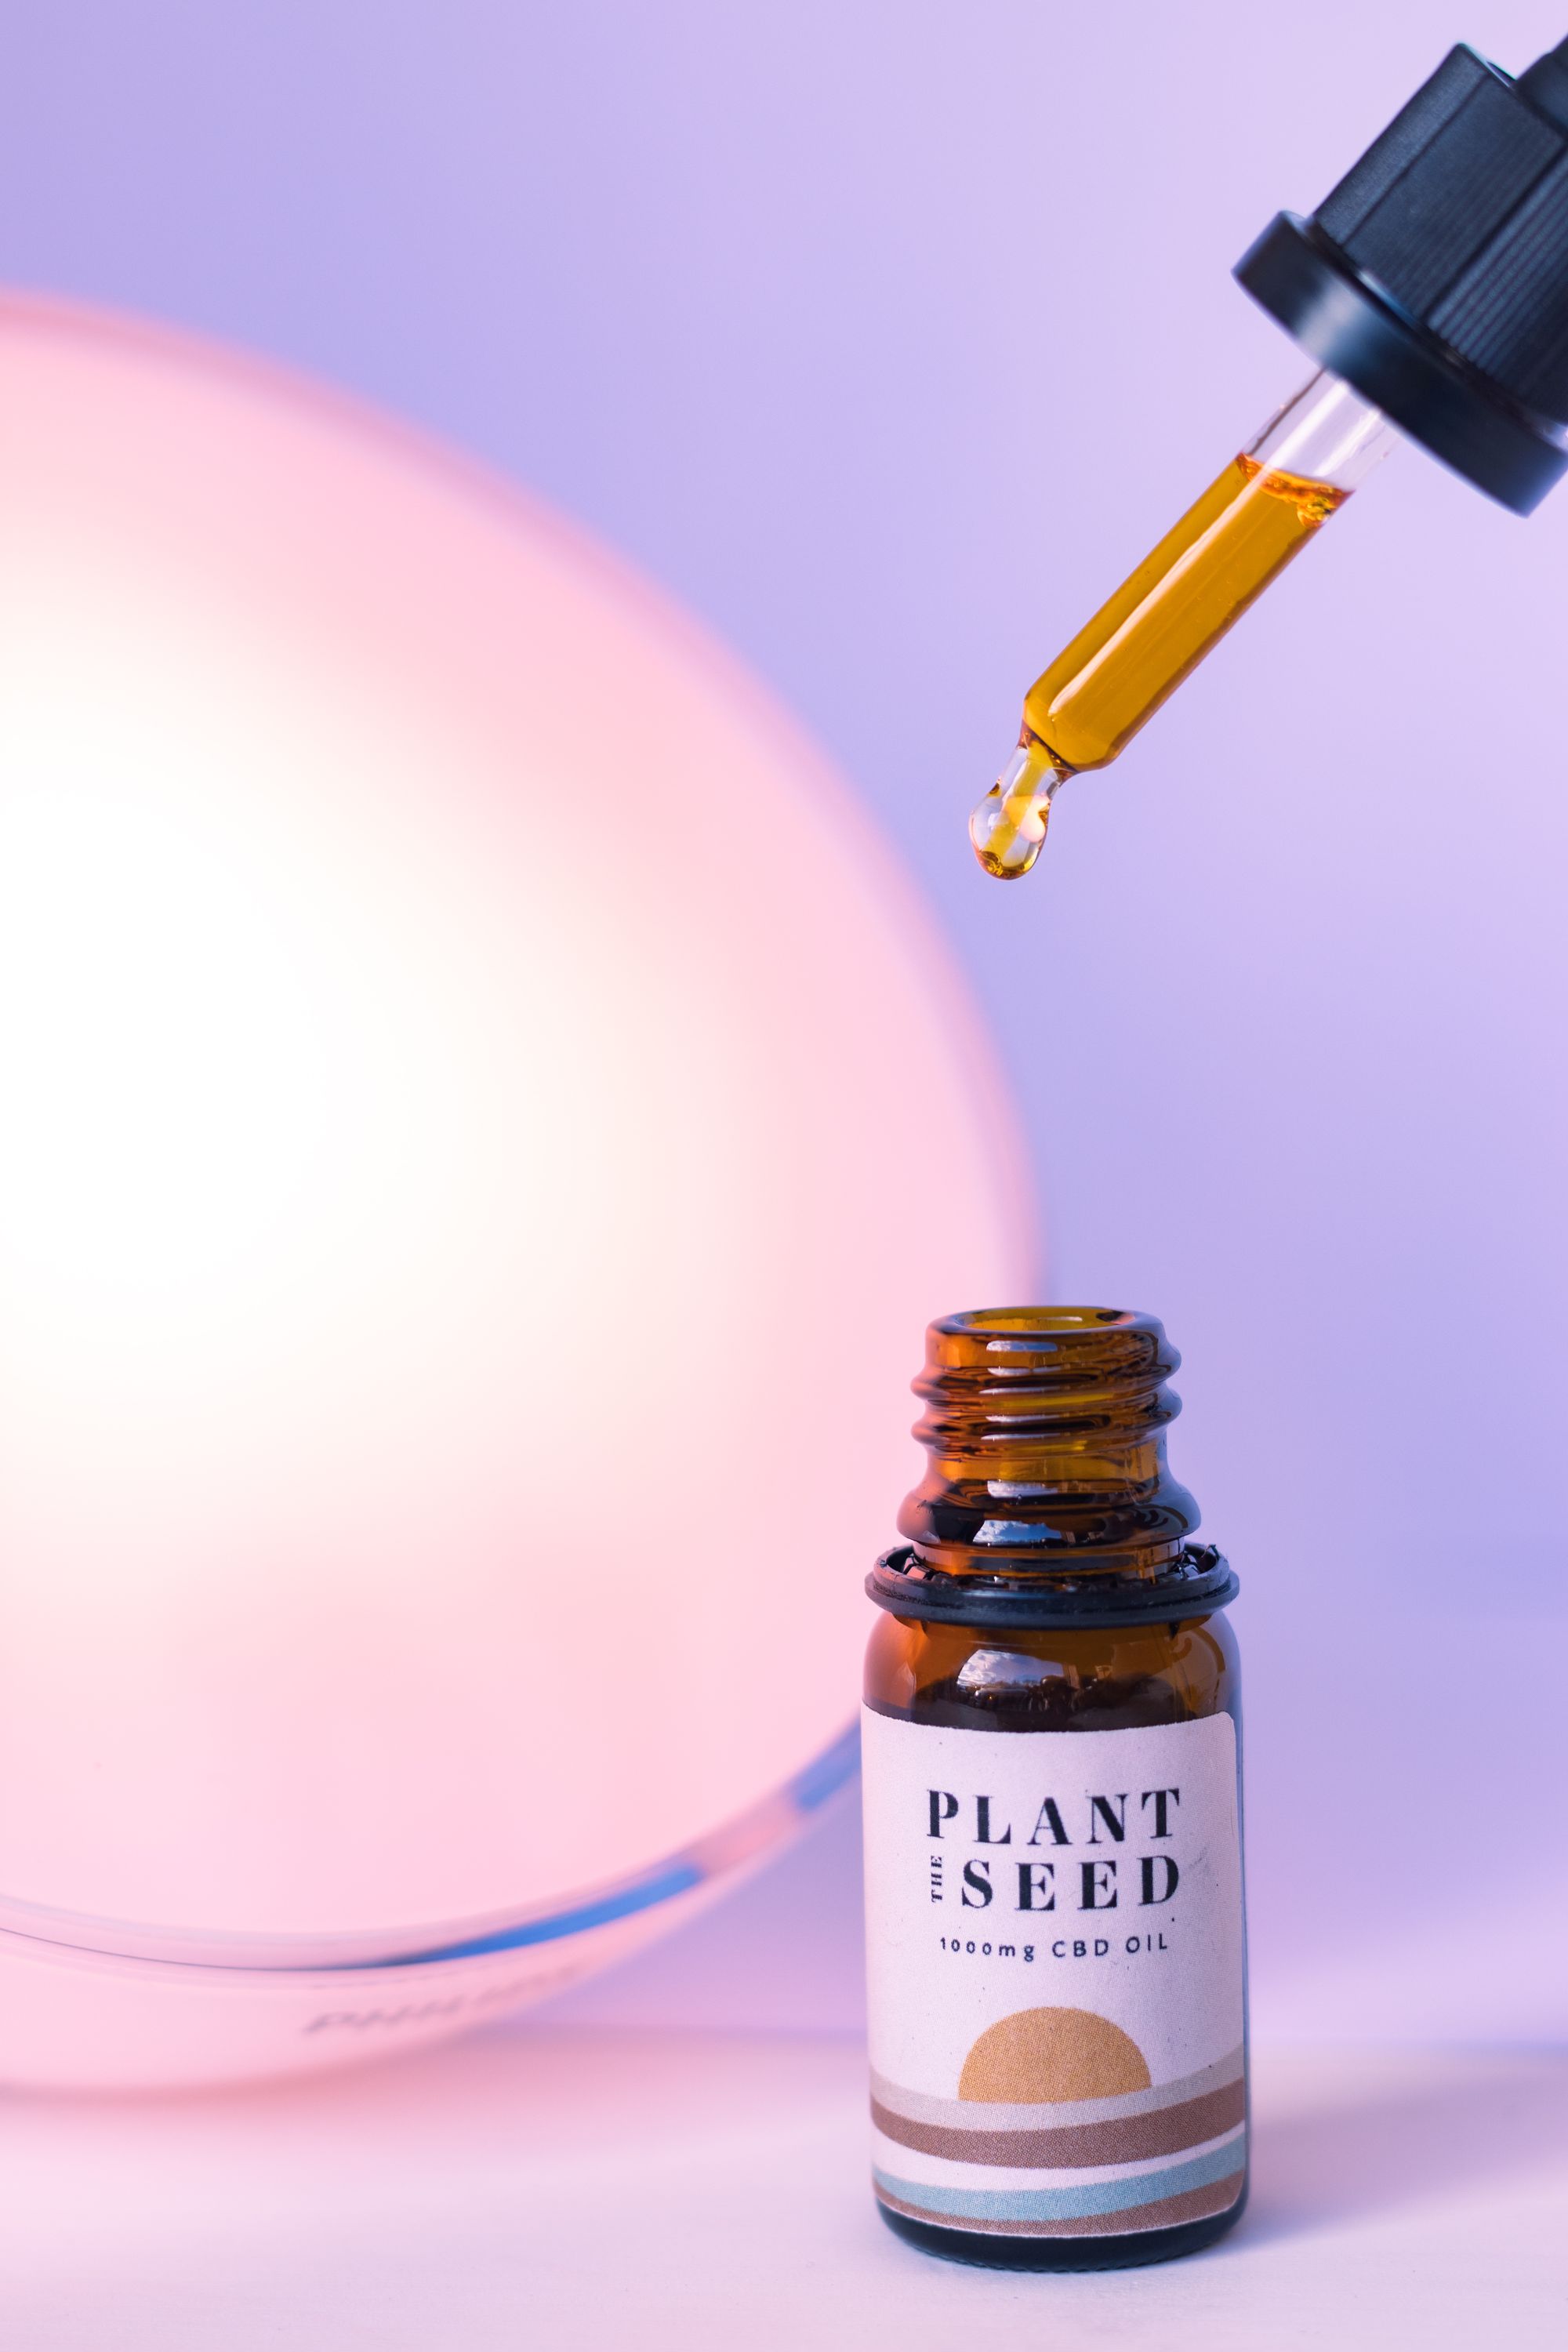 PLANT THE SEED CBD OIL (REVIEW)